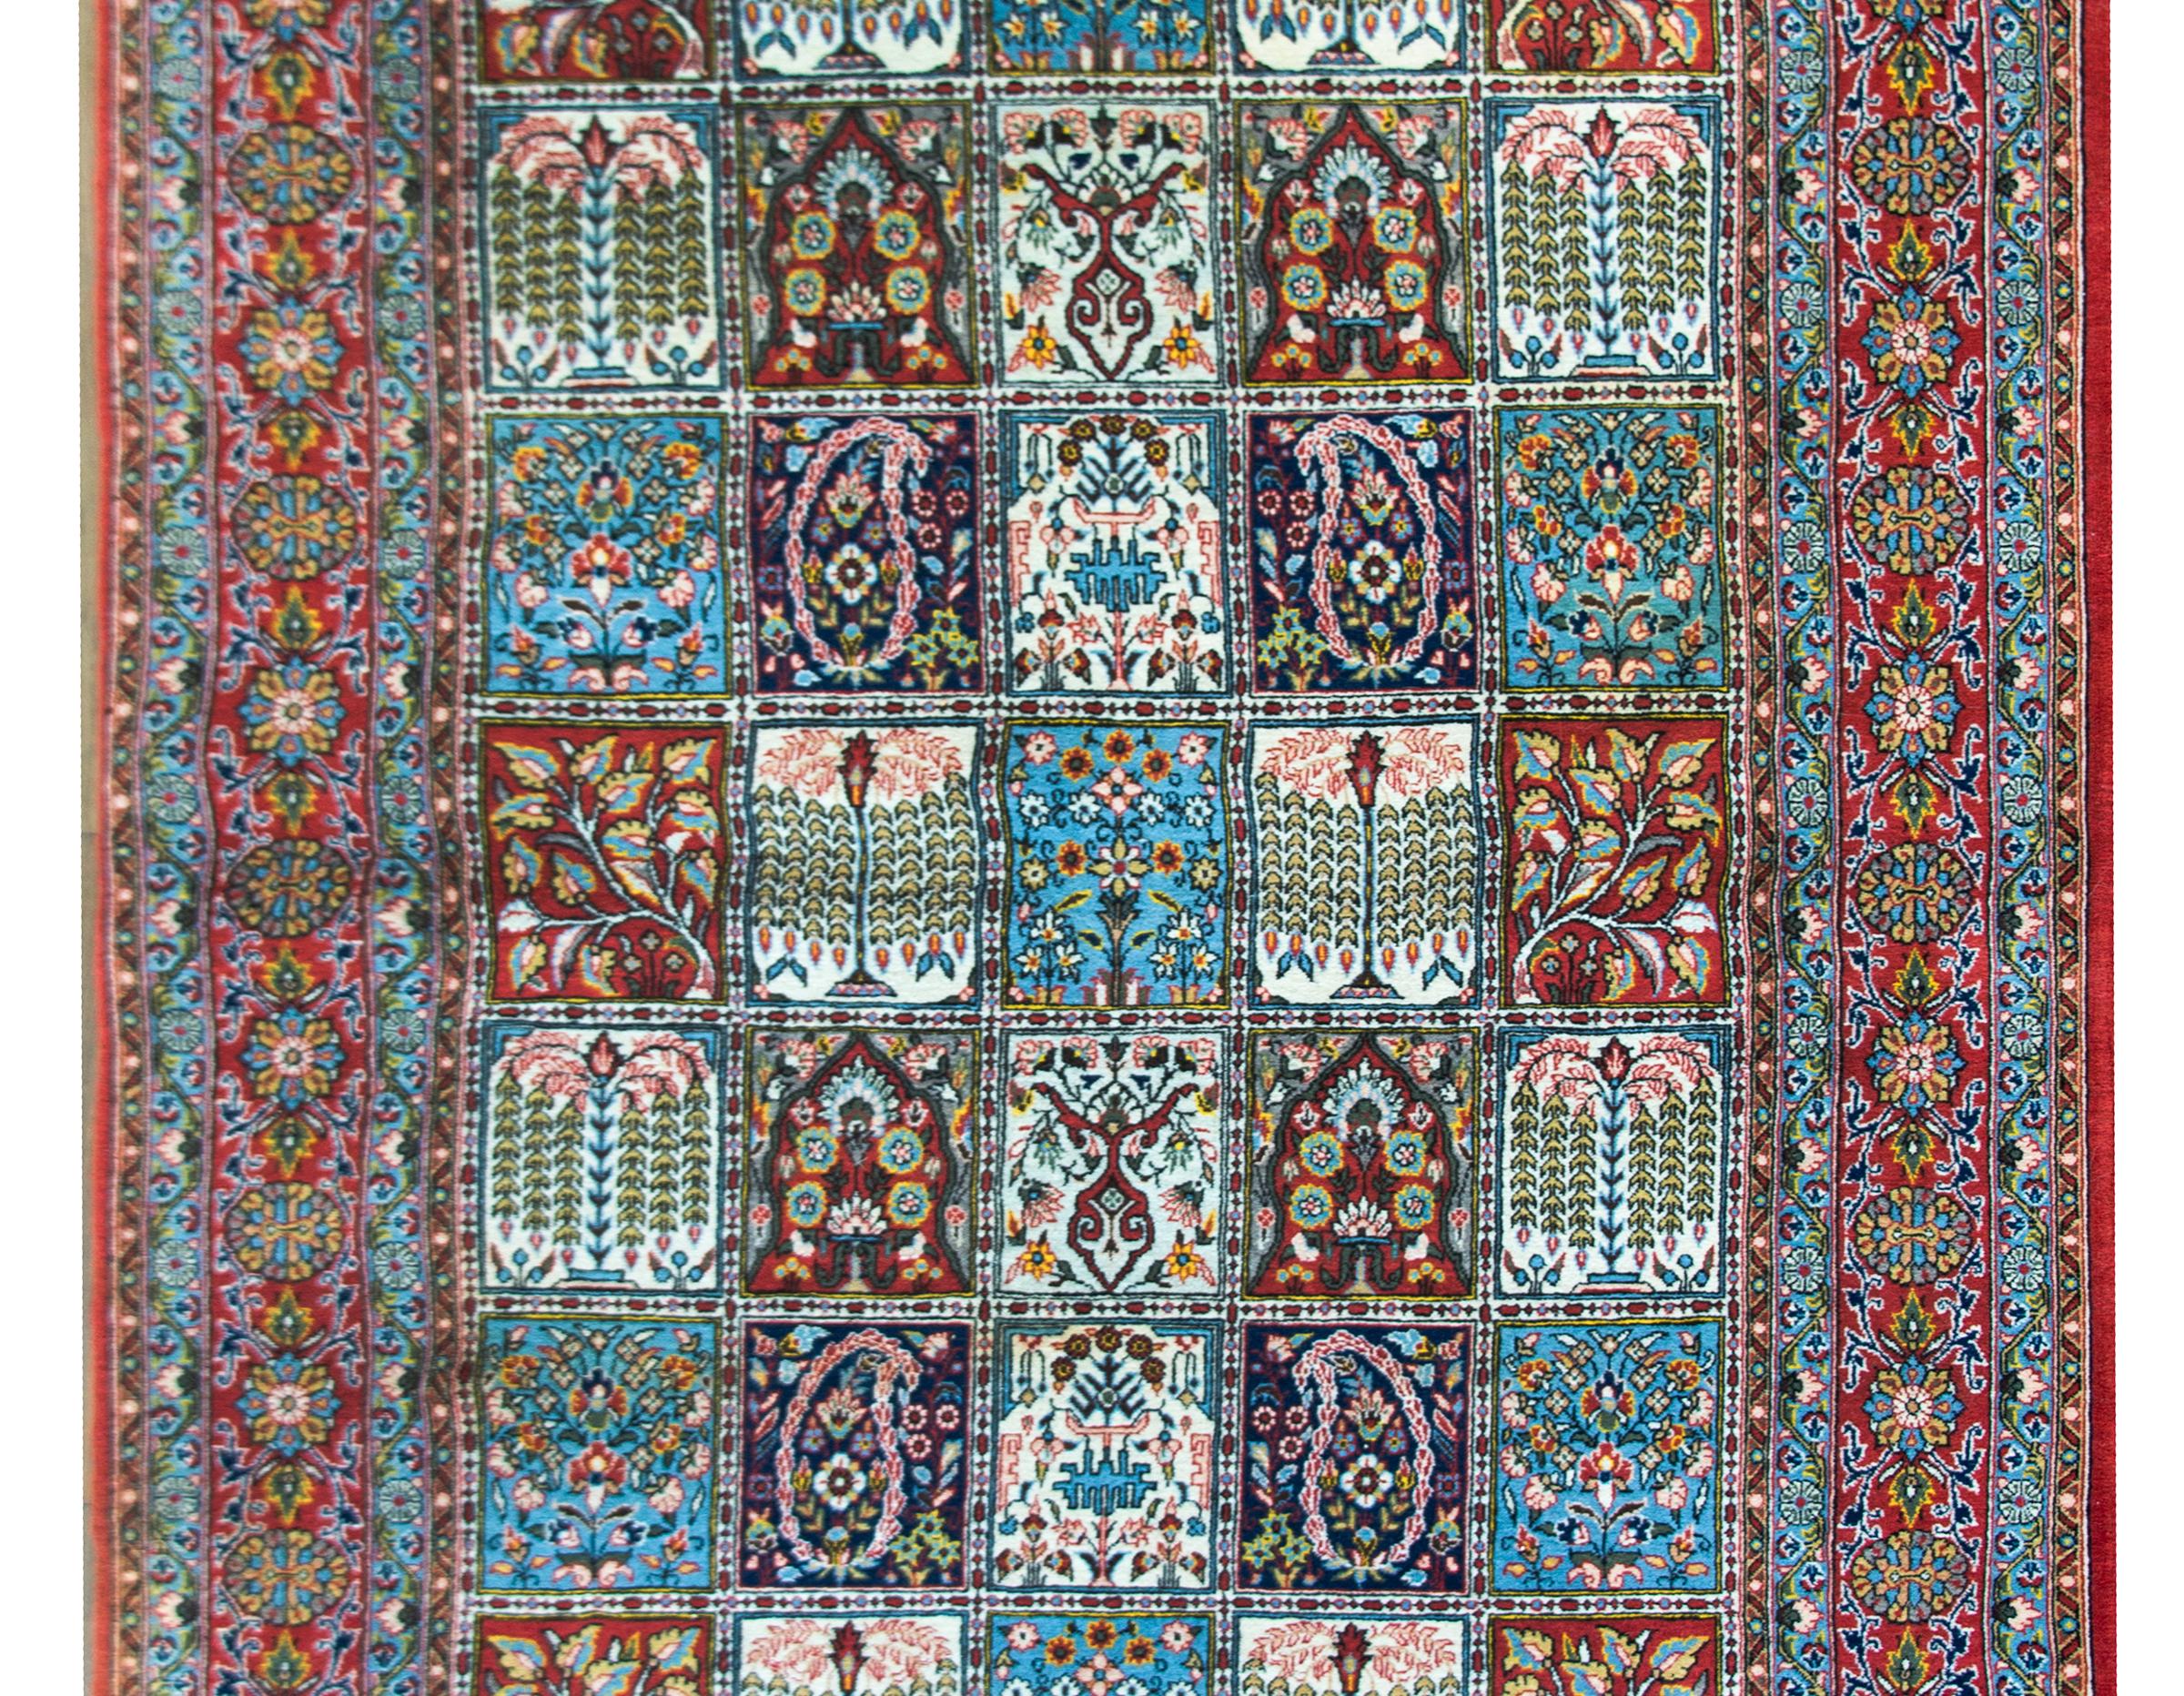 A wonderful vintage Persian Bakhtiari rug with an all-over patcherwork pattern with several repeated floral, paisley, weeping willow tree, and trees-of-life patterns, and surrounded by a border with a wide central floral stripe flanked by pairs of